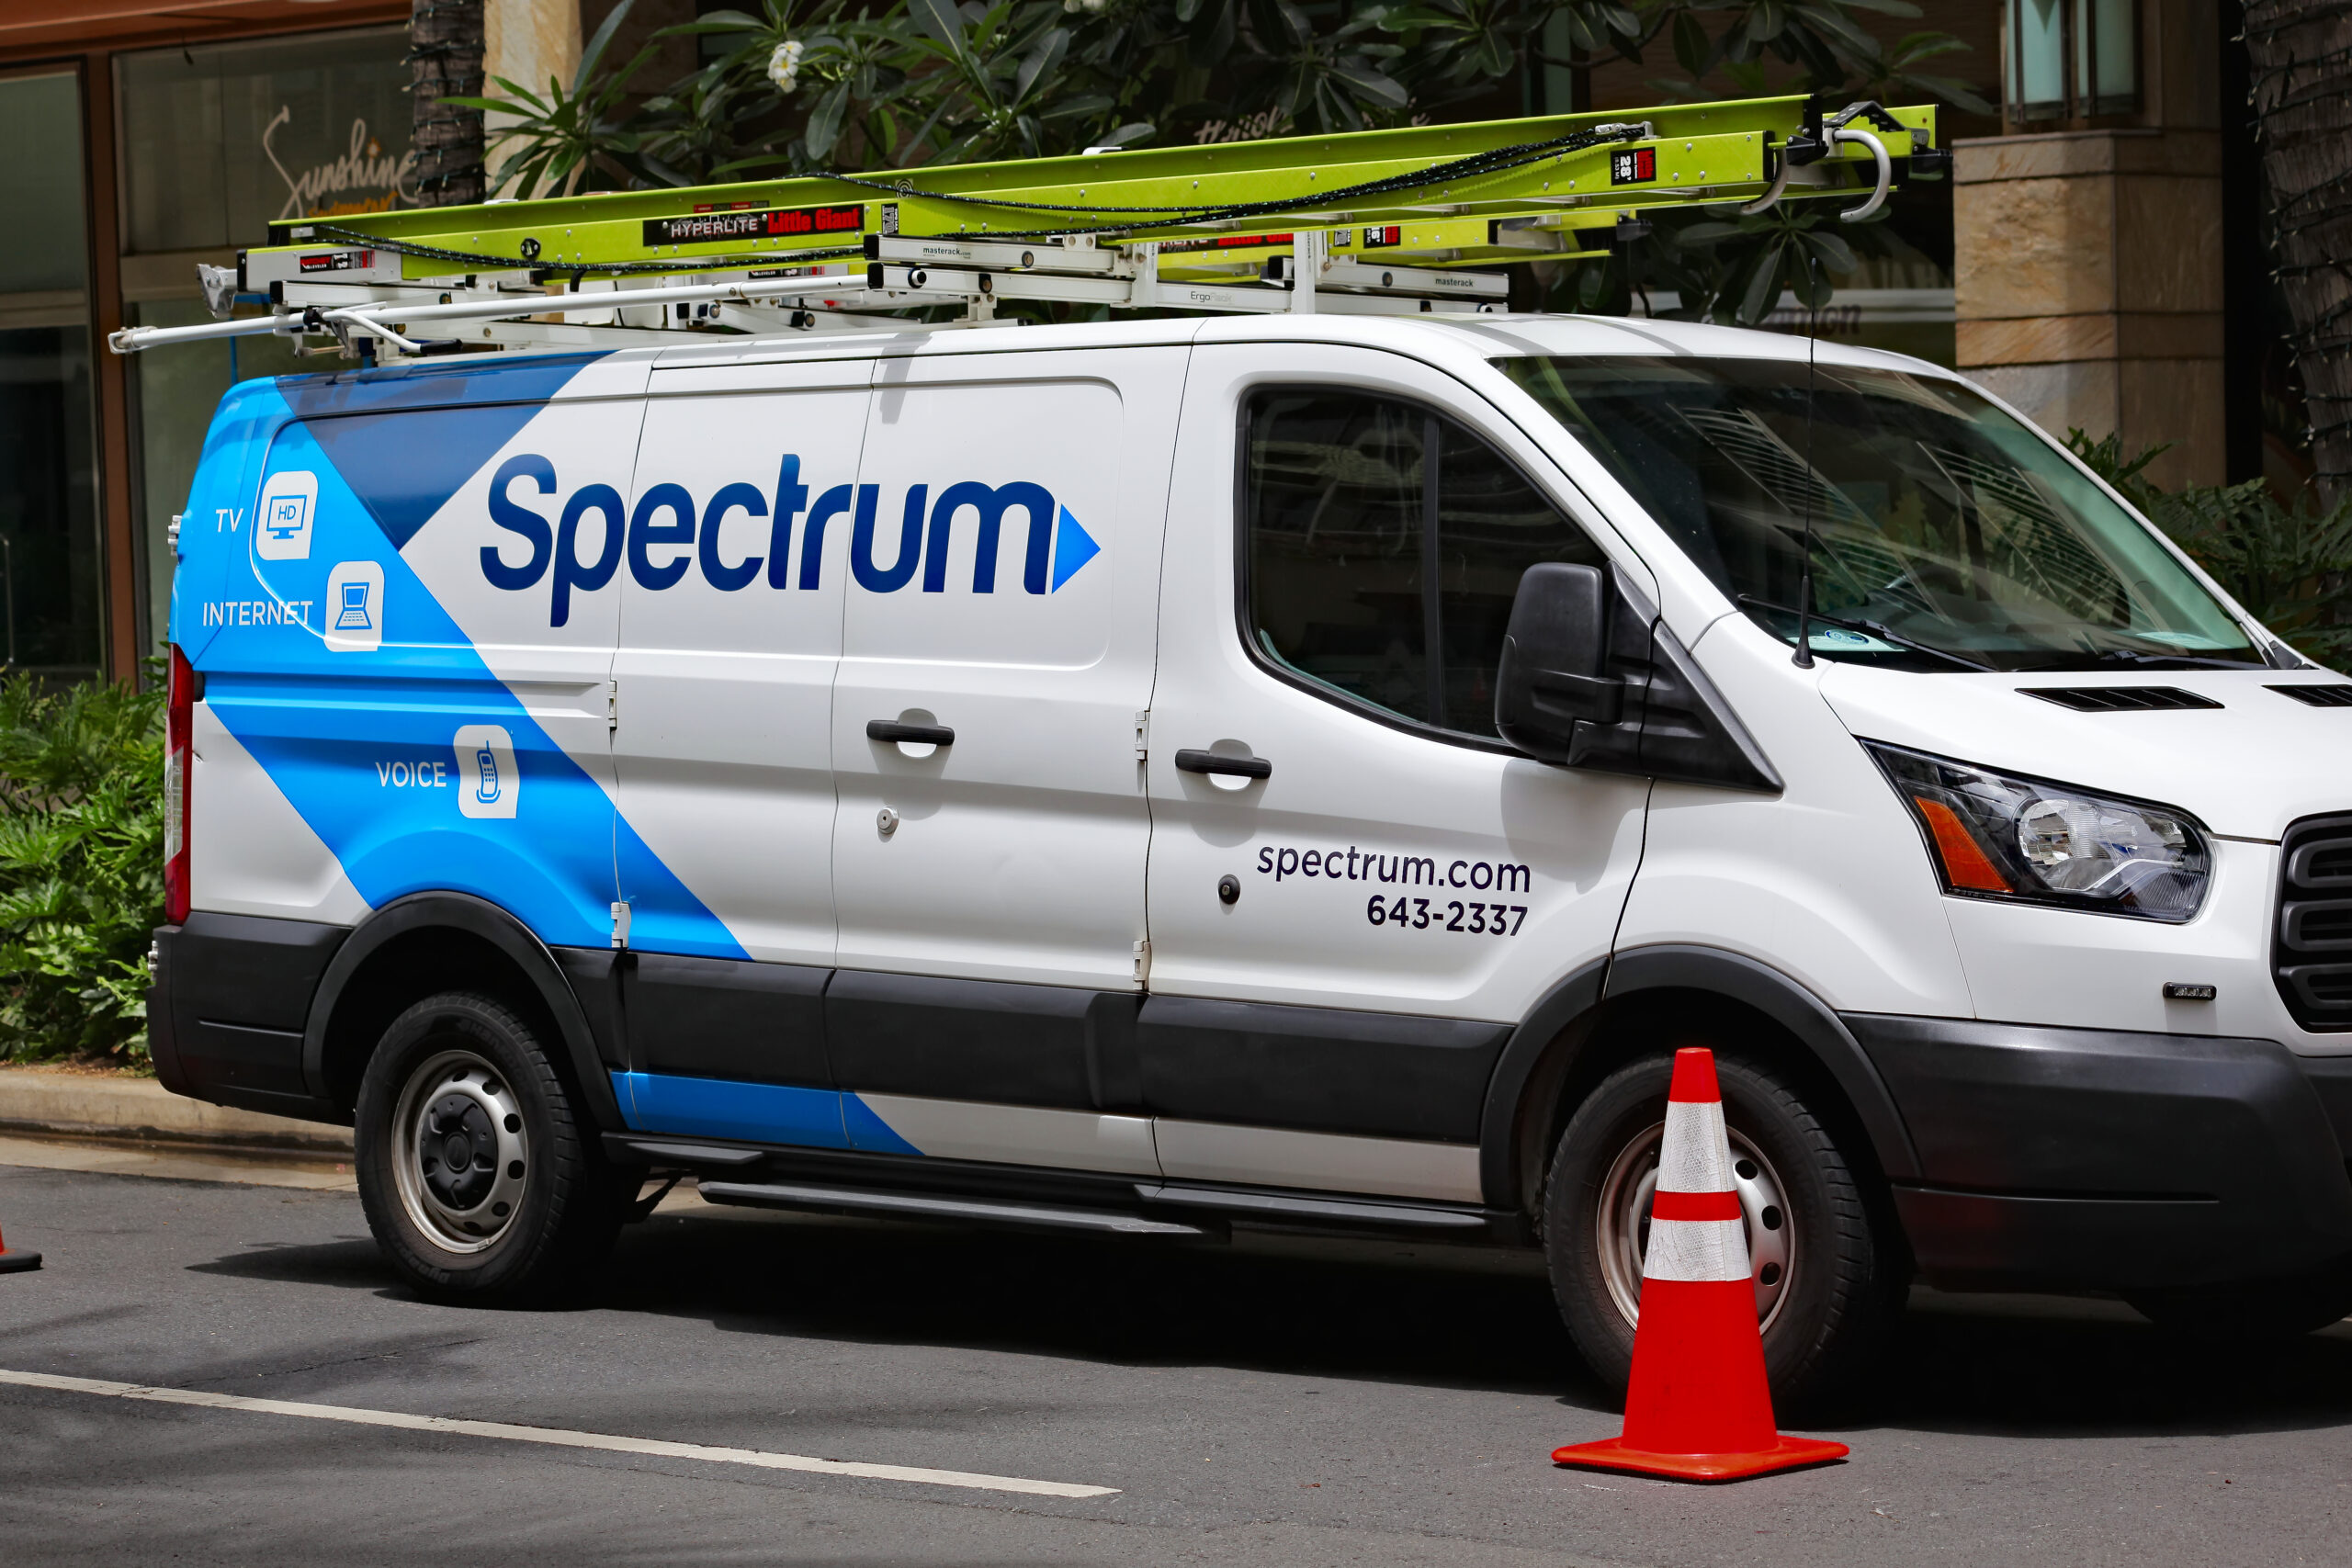 Spectrum To Buy Up Another Small Cable TV Company